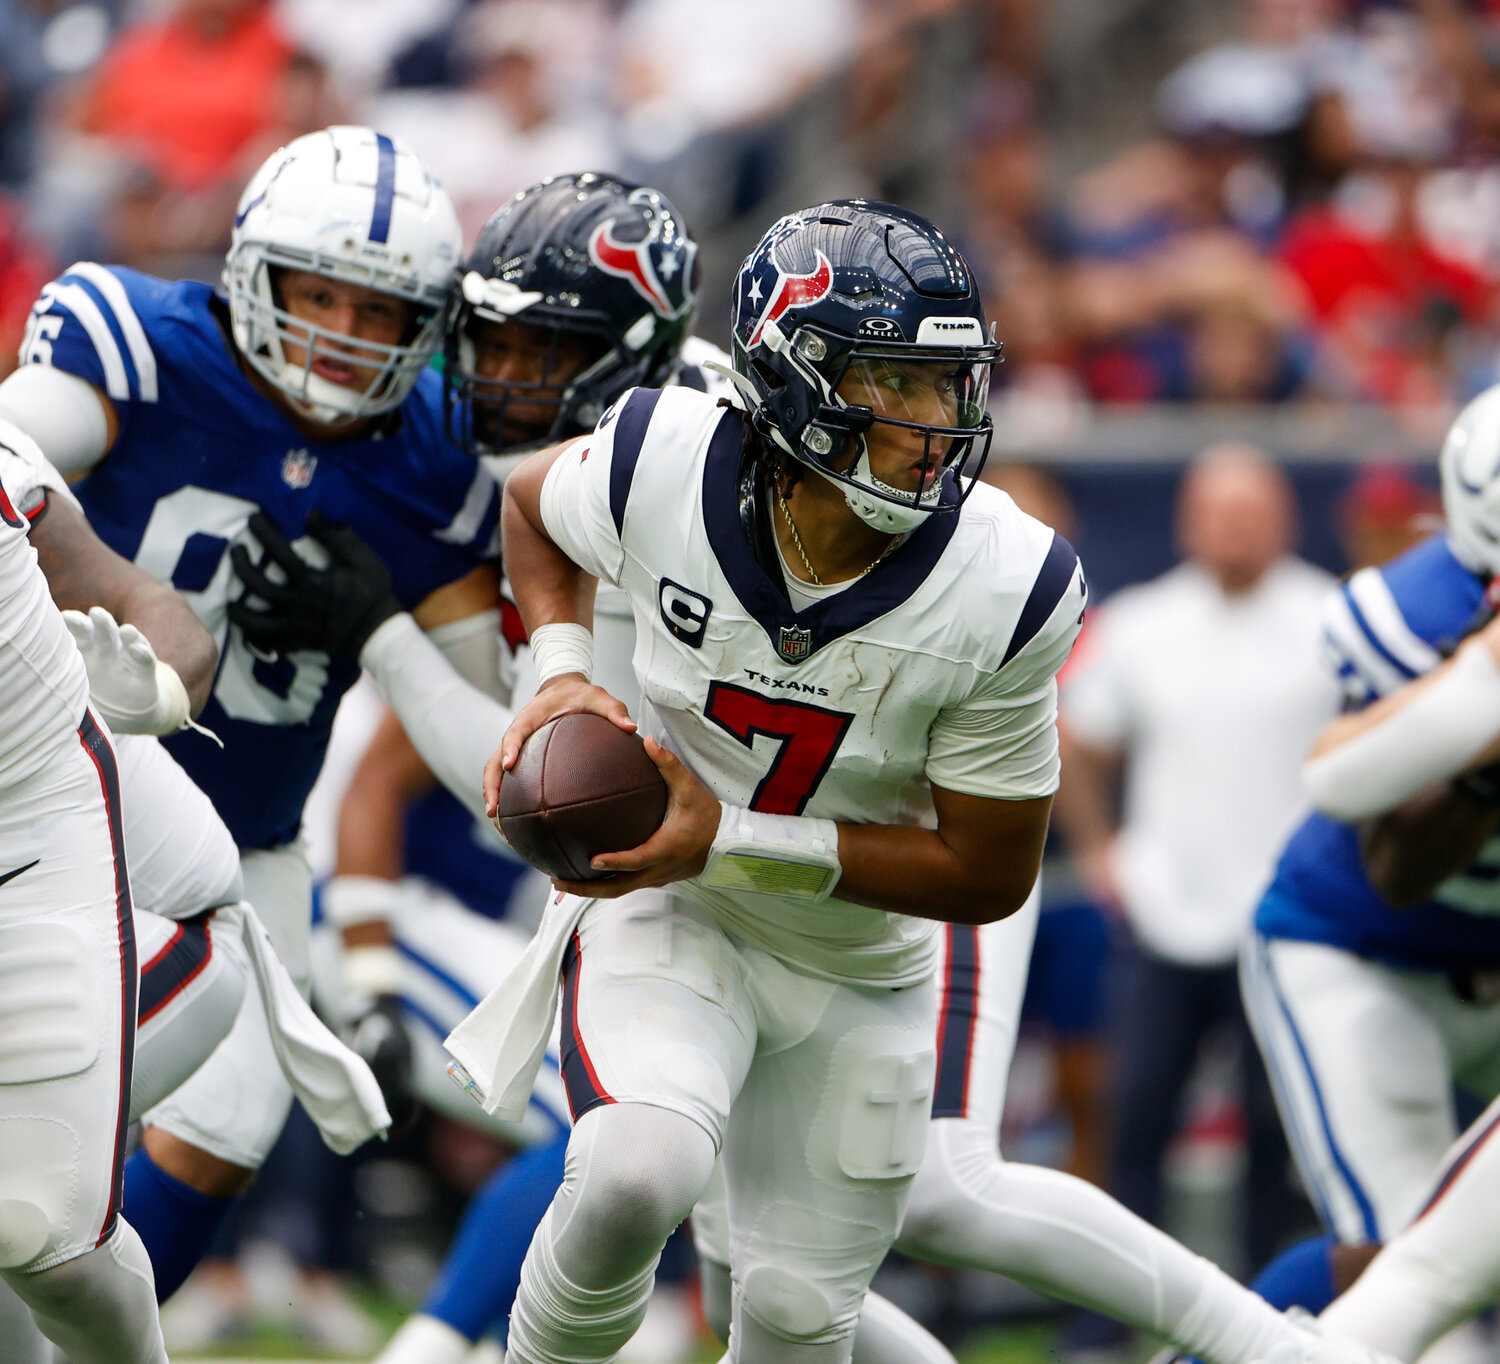 Texans quarterback C.J. Stroud (7) rolls out after a snap during an NFL game between the Texans and the Colts on September 17, 2023 in Houston. The Colts won, 31-20.